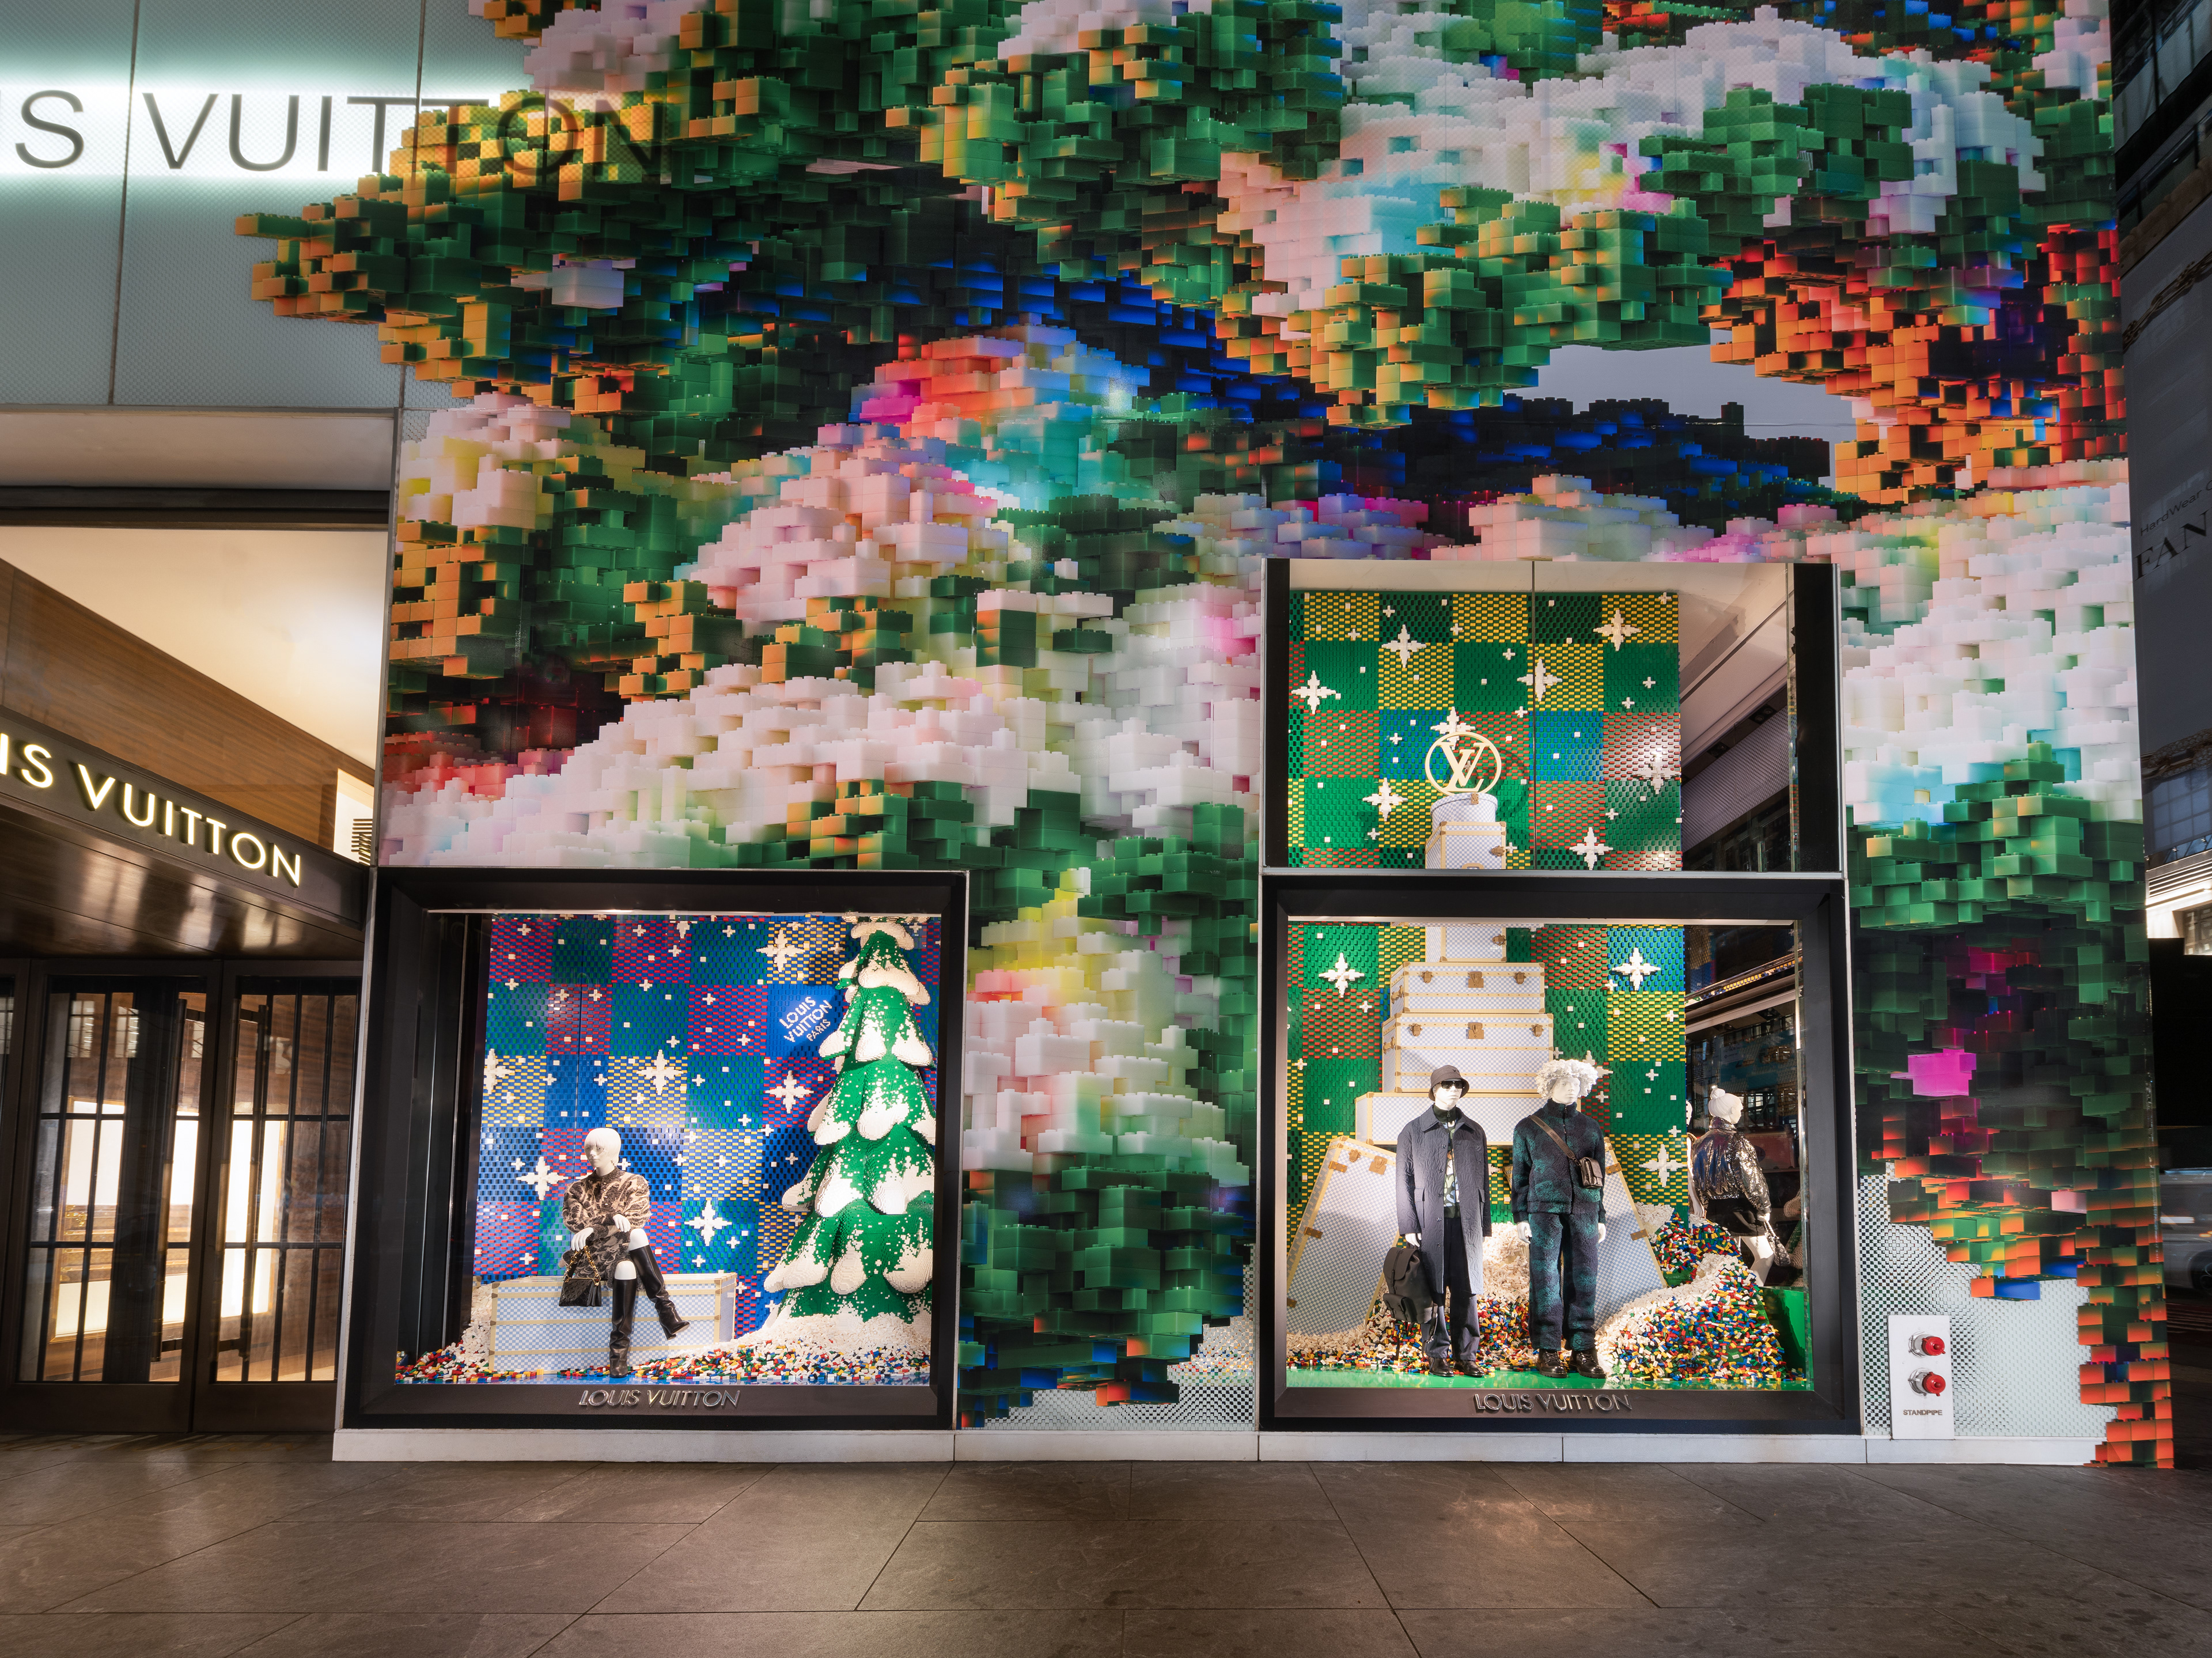 Louis Vuitton & Lego collab holiday window appears at